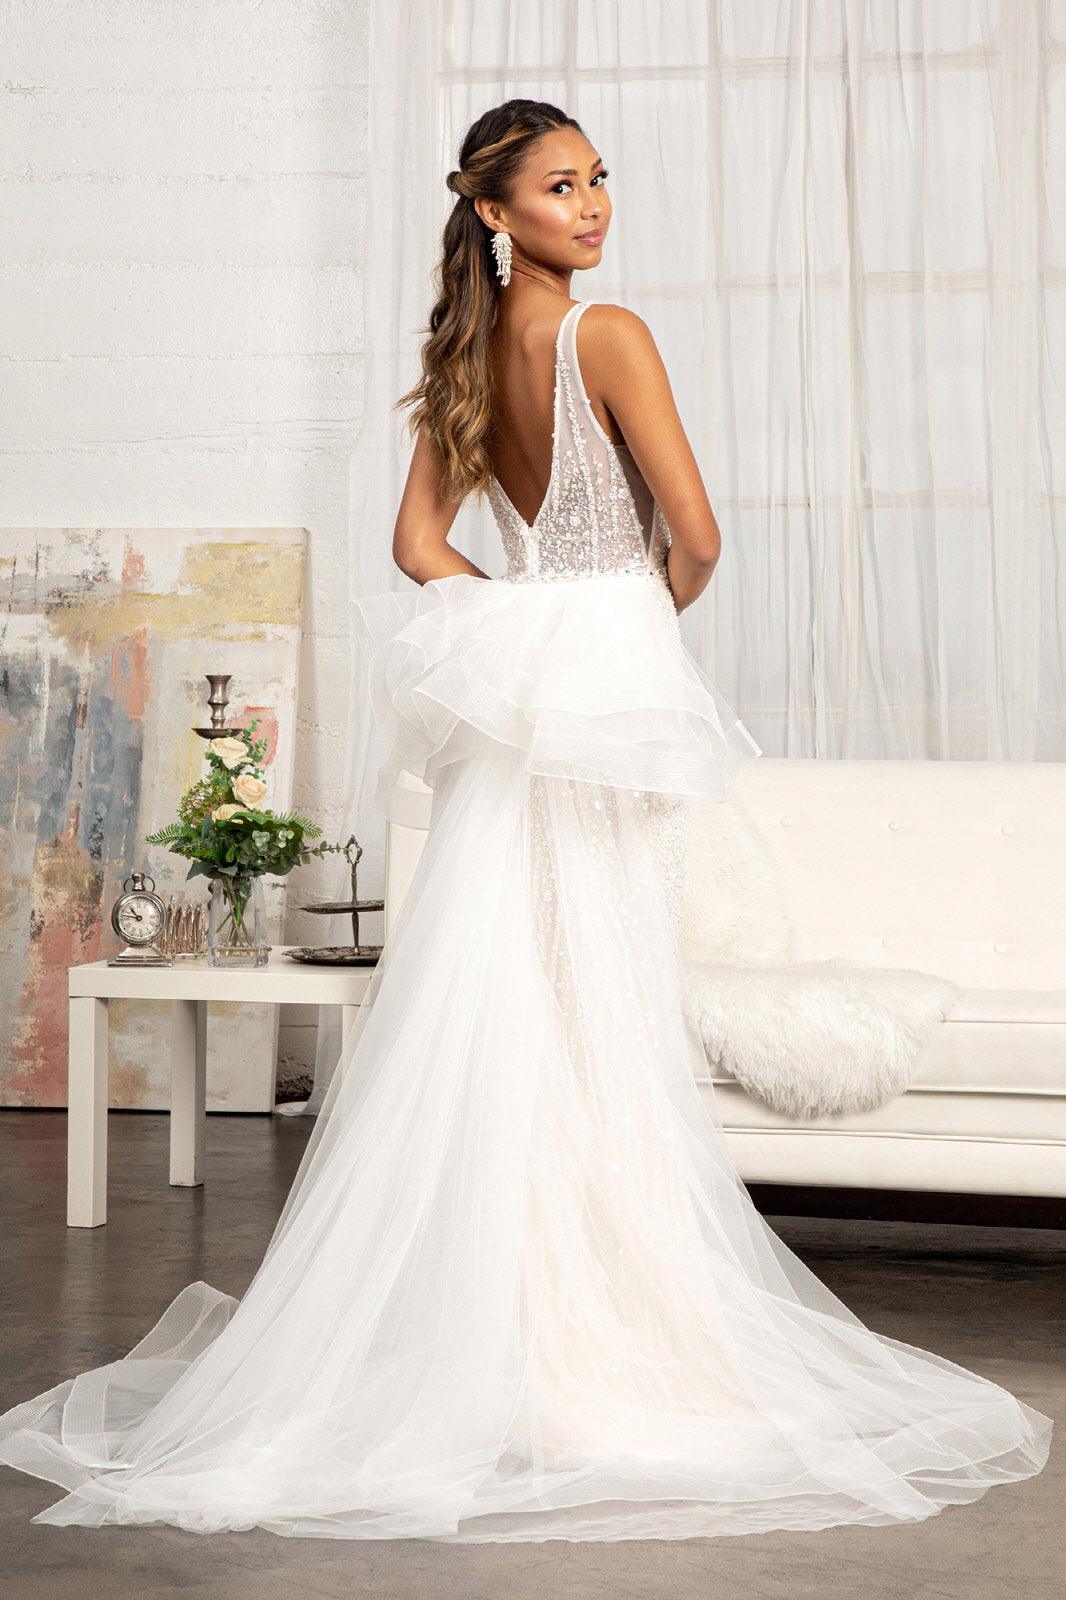 Bridal Long Sleeveless Mermaid Mesh Wedding Gown - The Dress Outlet